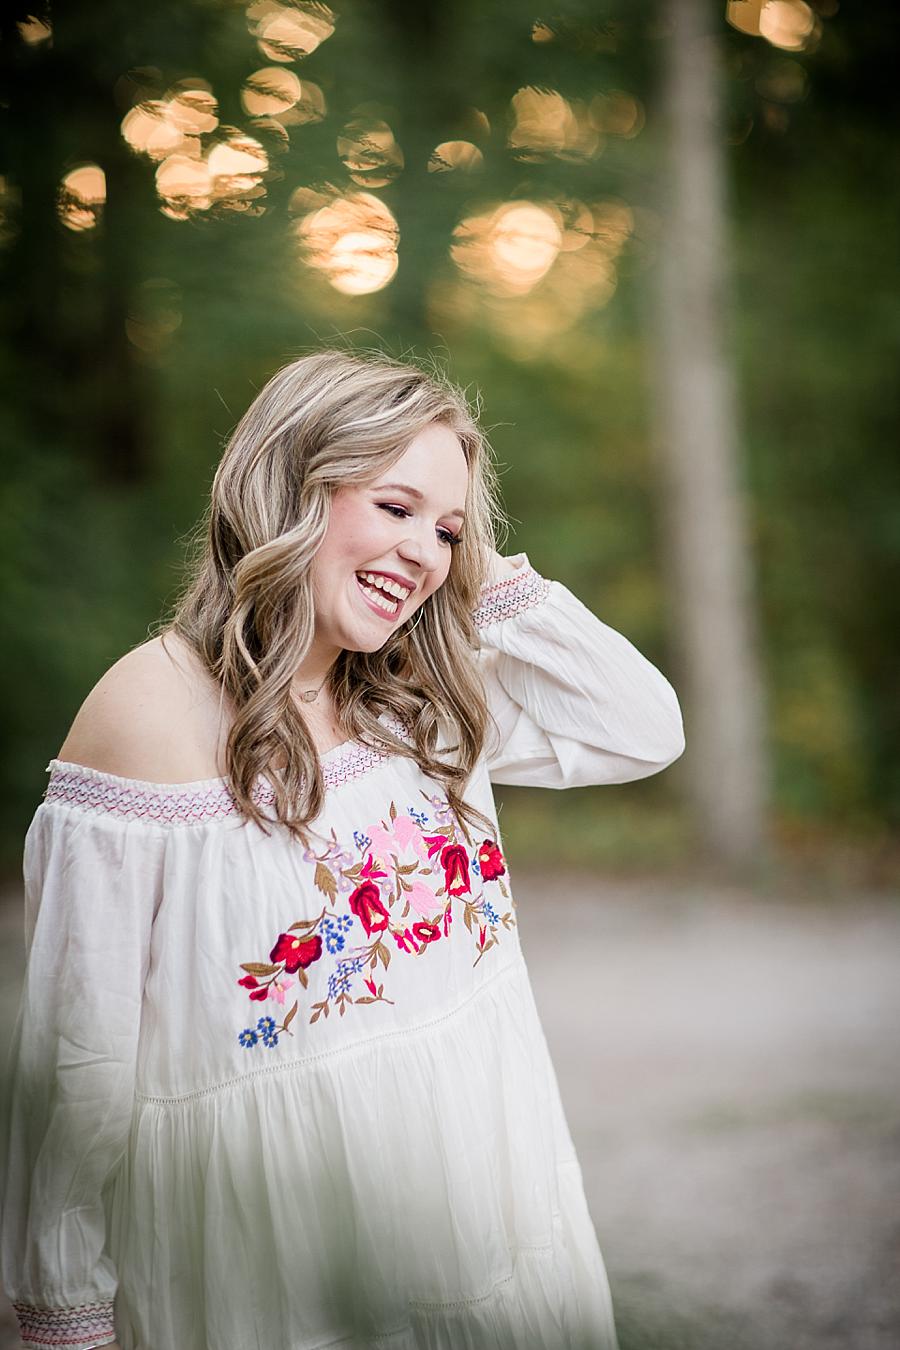 Smiling at this Estate of Grace Senior Session by Knoxville Wedding Photographer, Amanda May Photos.